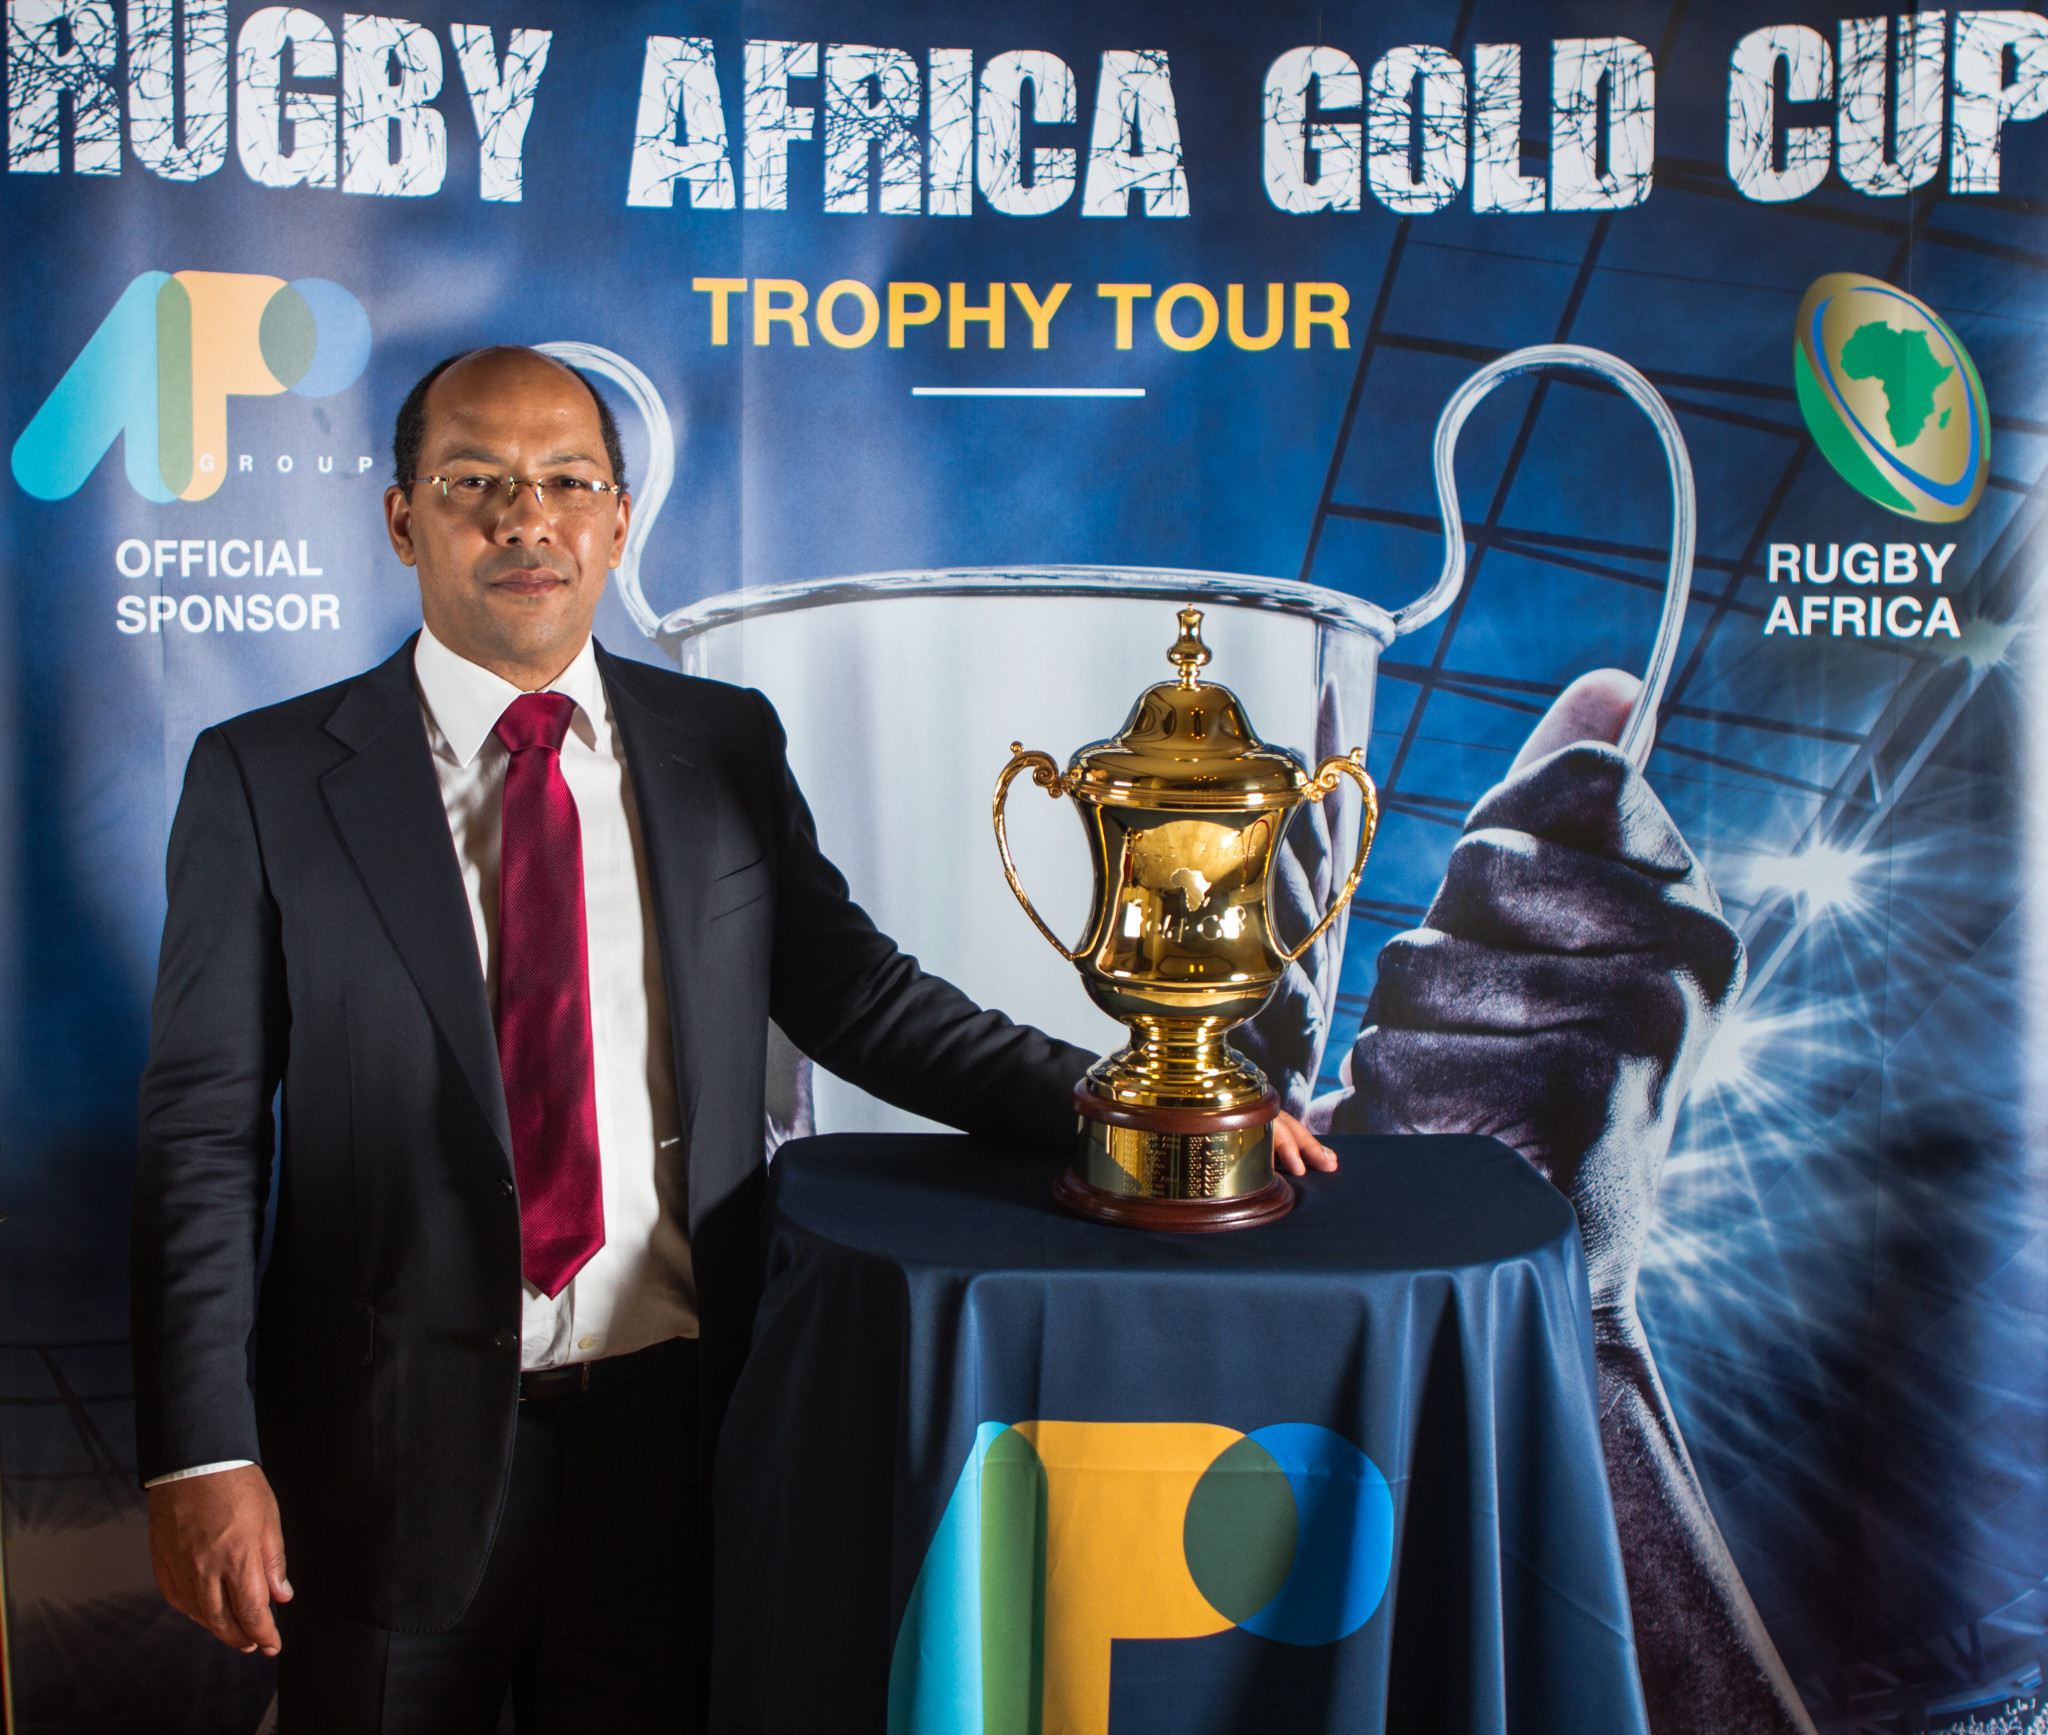 The winners of the Rugby Africa Gold Cup will get their hands on a 2019 Rugby World Cup spot as well as the Perpetual Trophy ©Getty Images